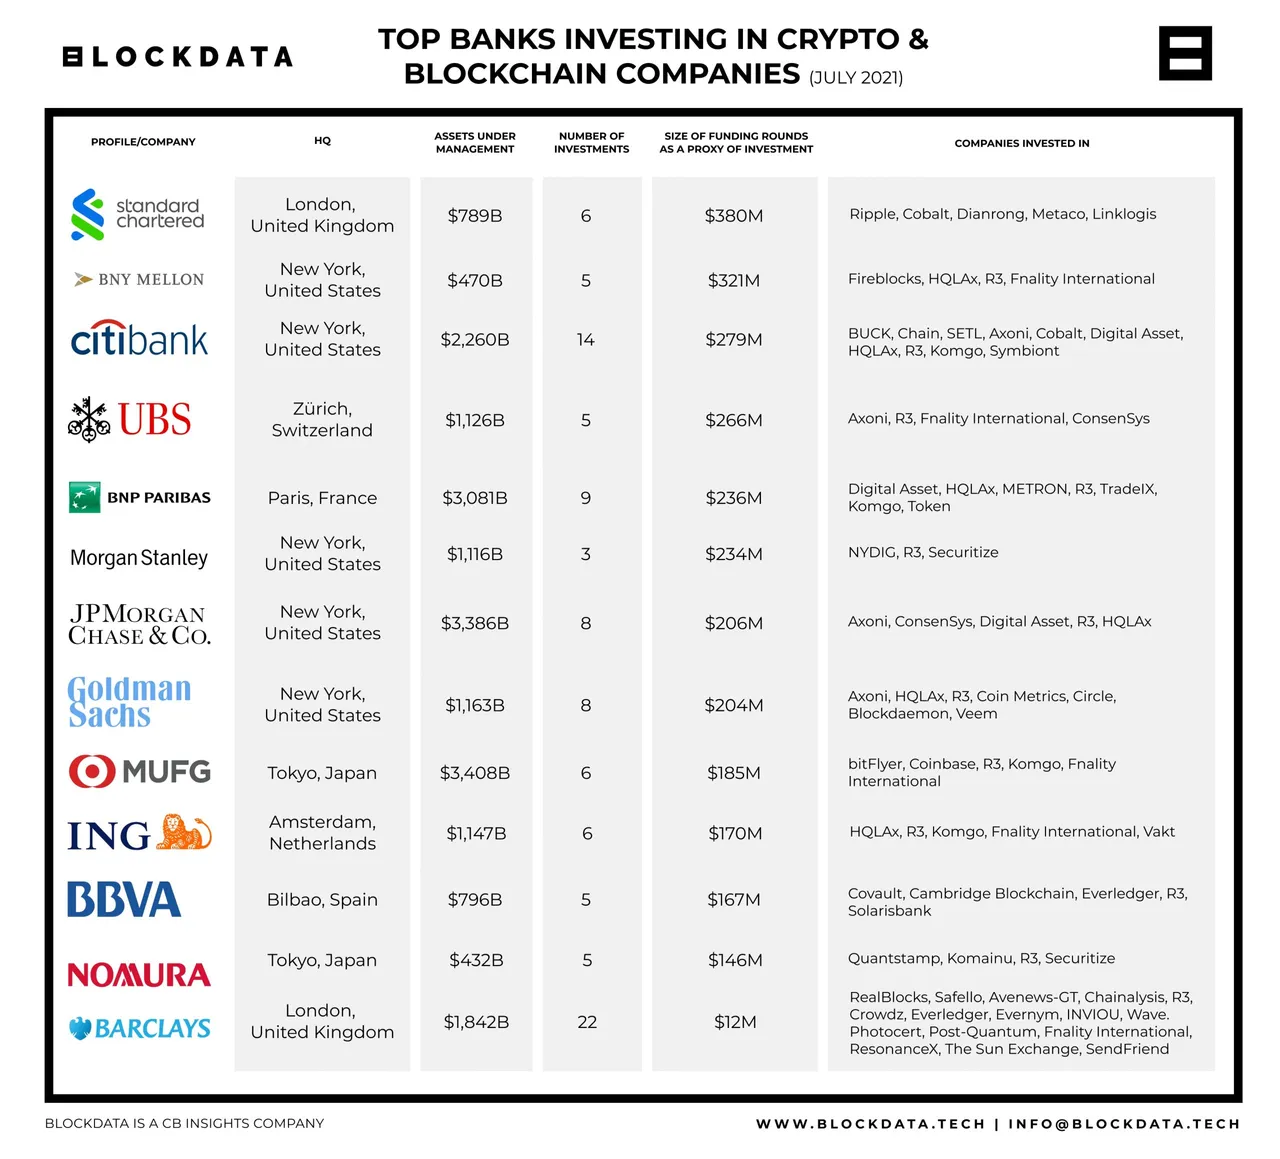 Chart-1-top-banks-investing-in-crypto-and-blockchain-companies-as-of-july-2021.-scaled.jpeg